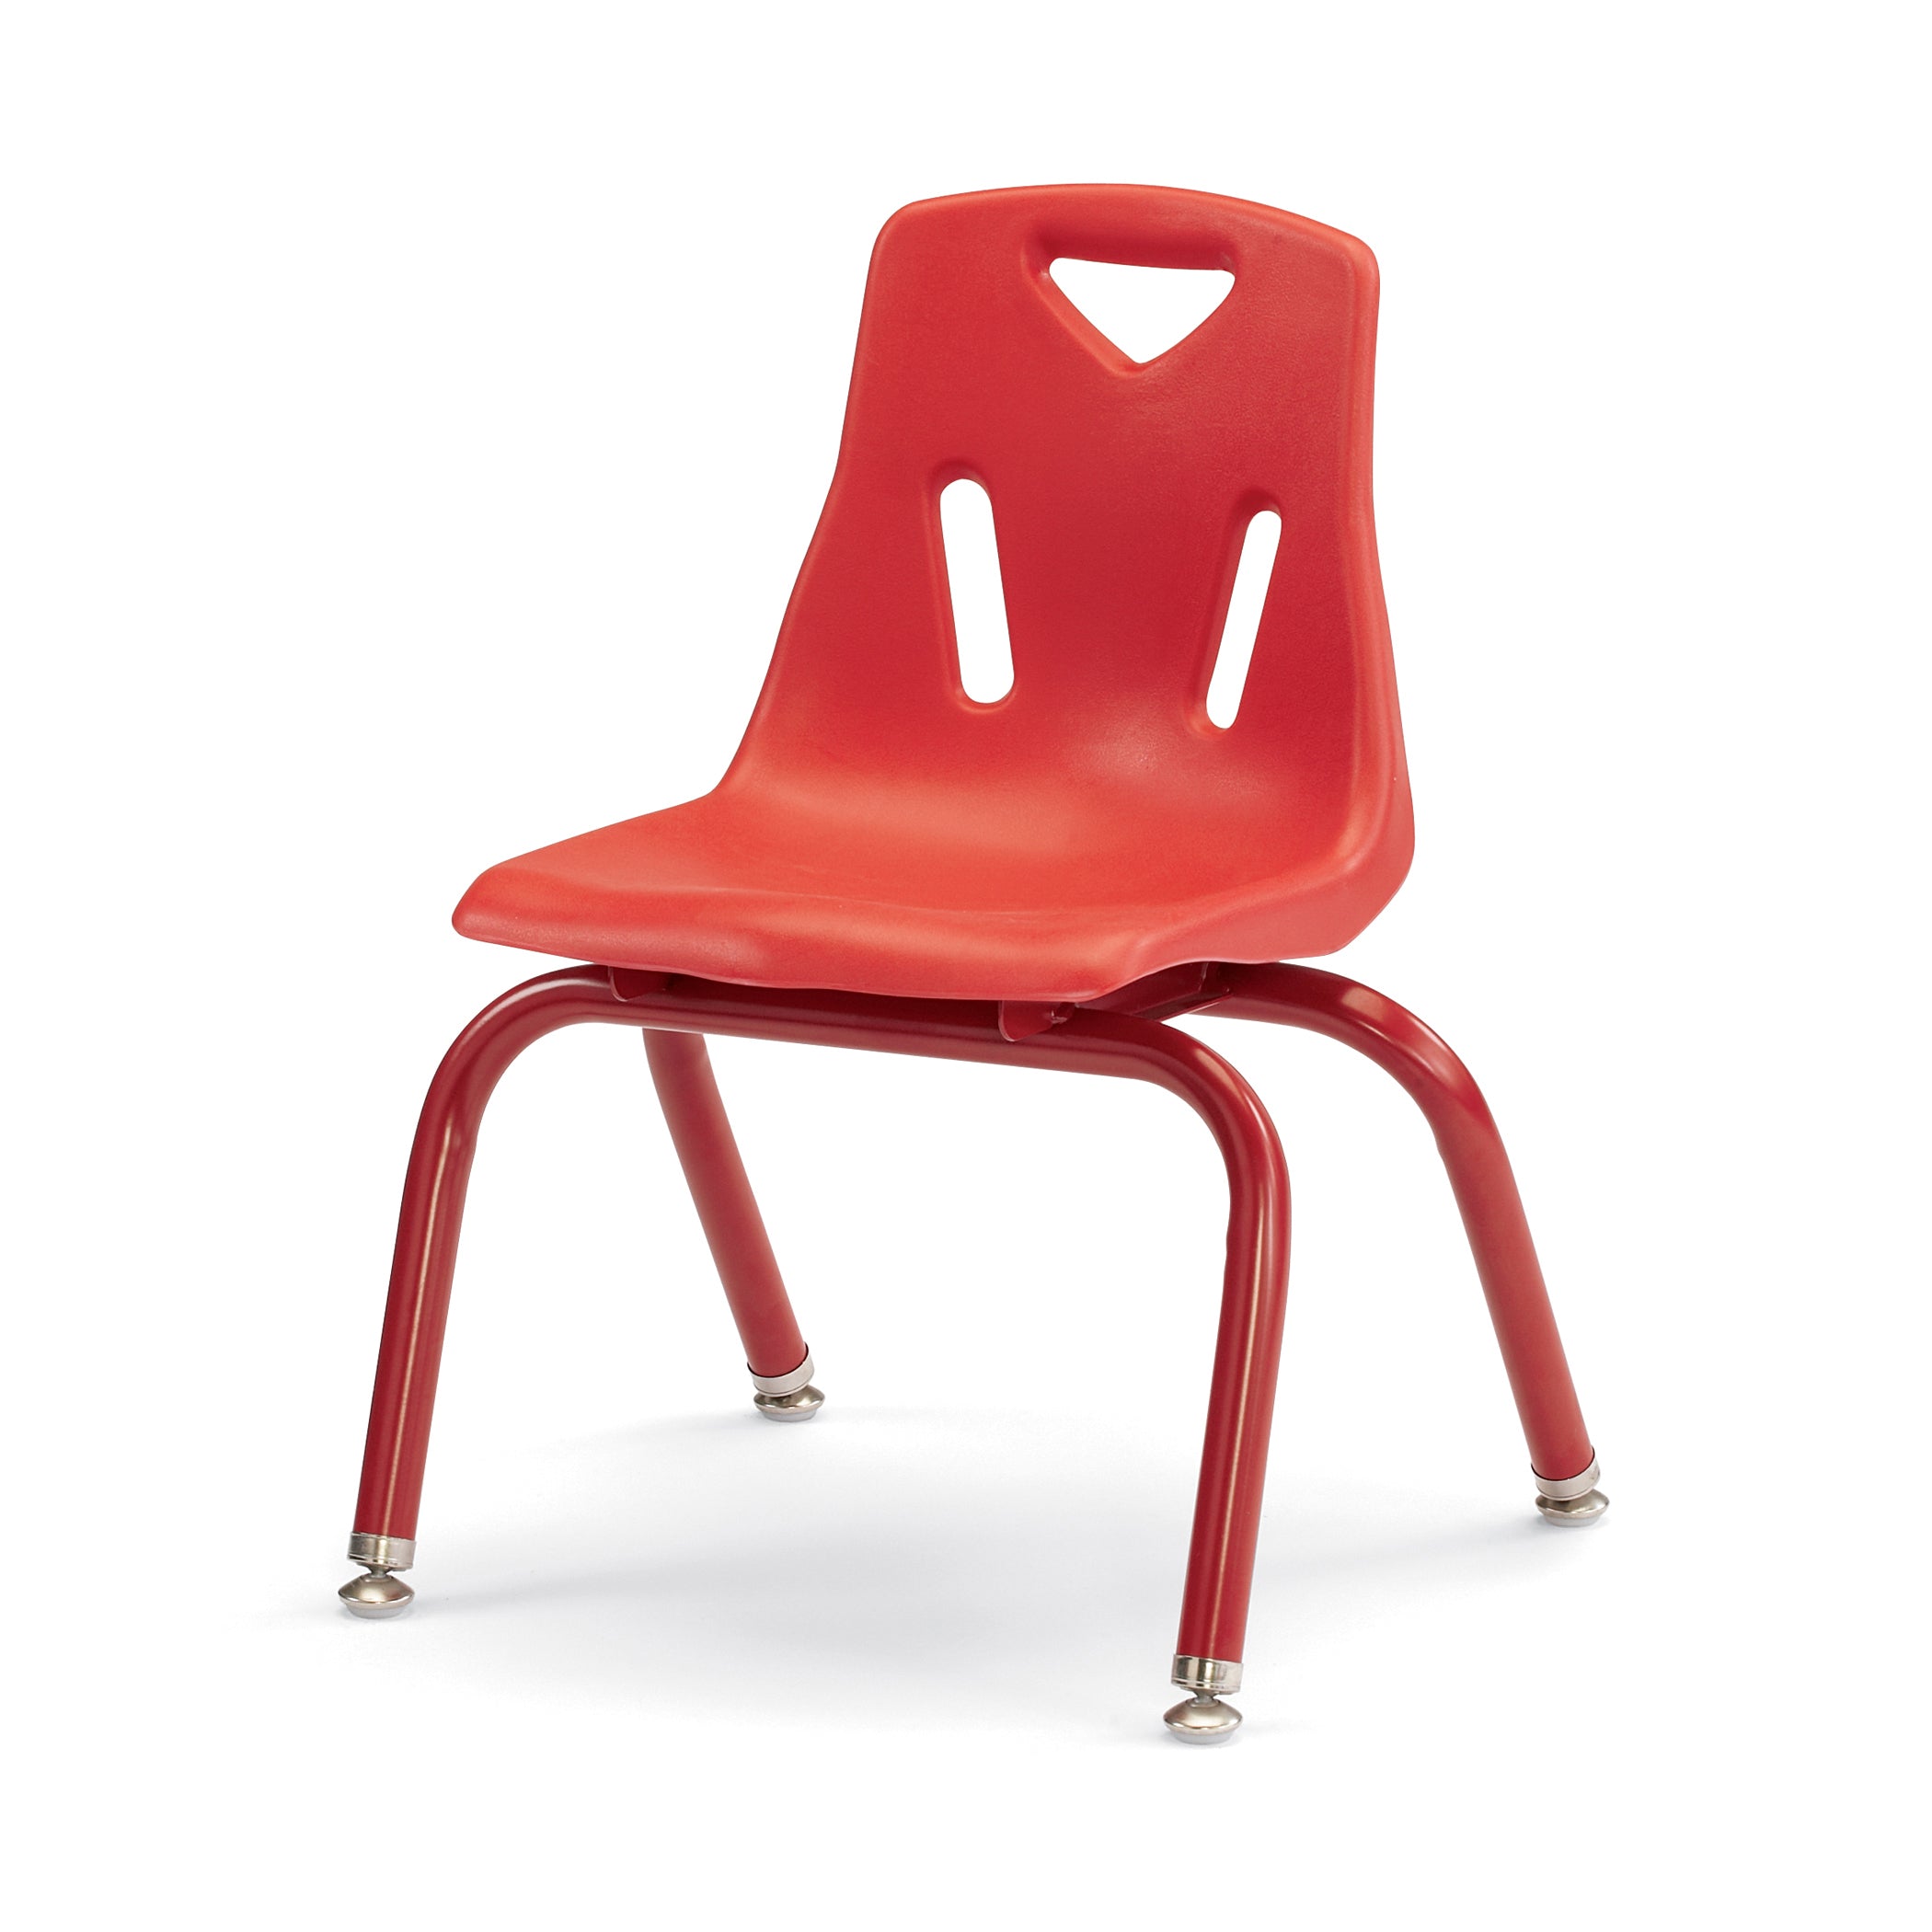 8122JC6008, Berries Stacking Chairs with Powder-Coated Legs - 12" Ht - Set of 6 - Red